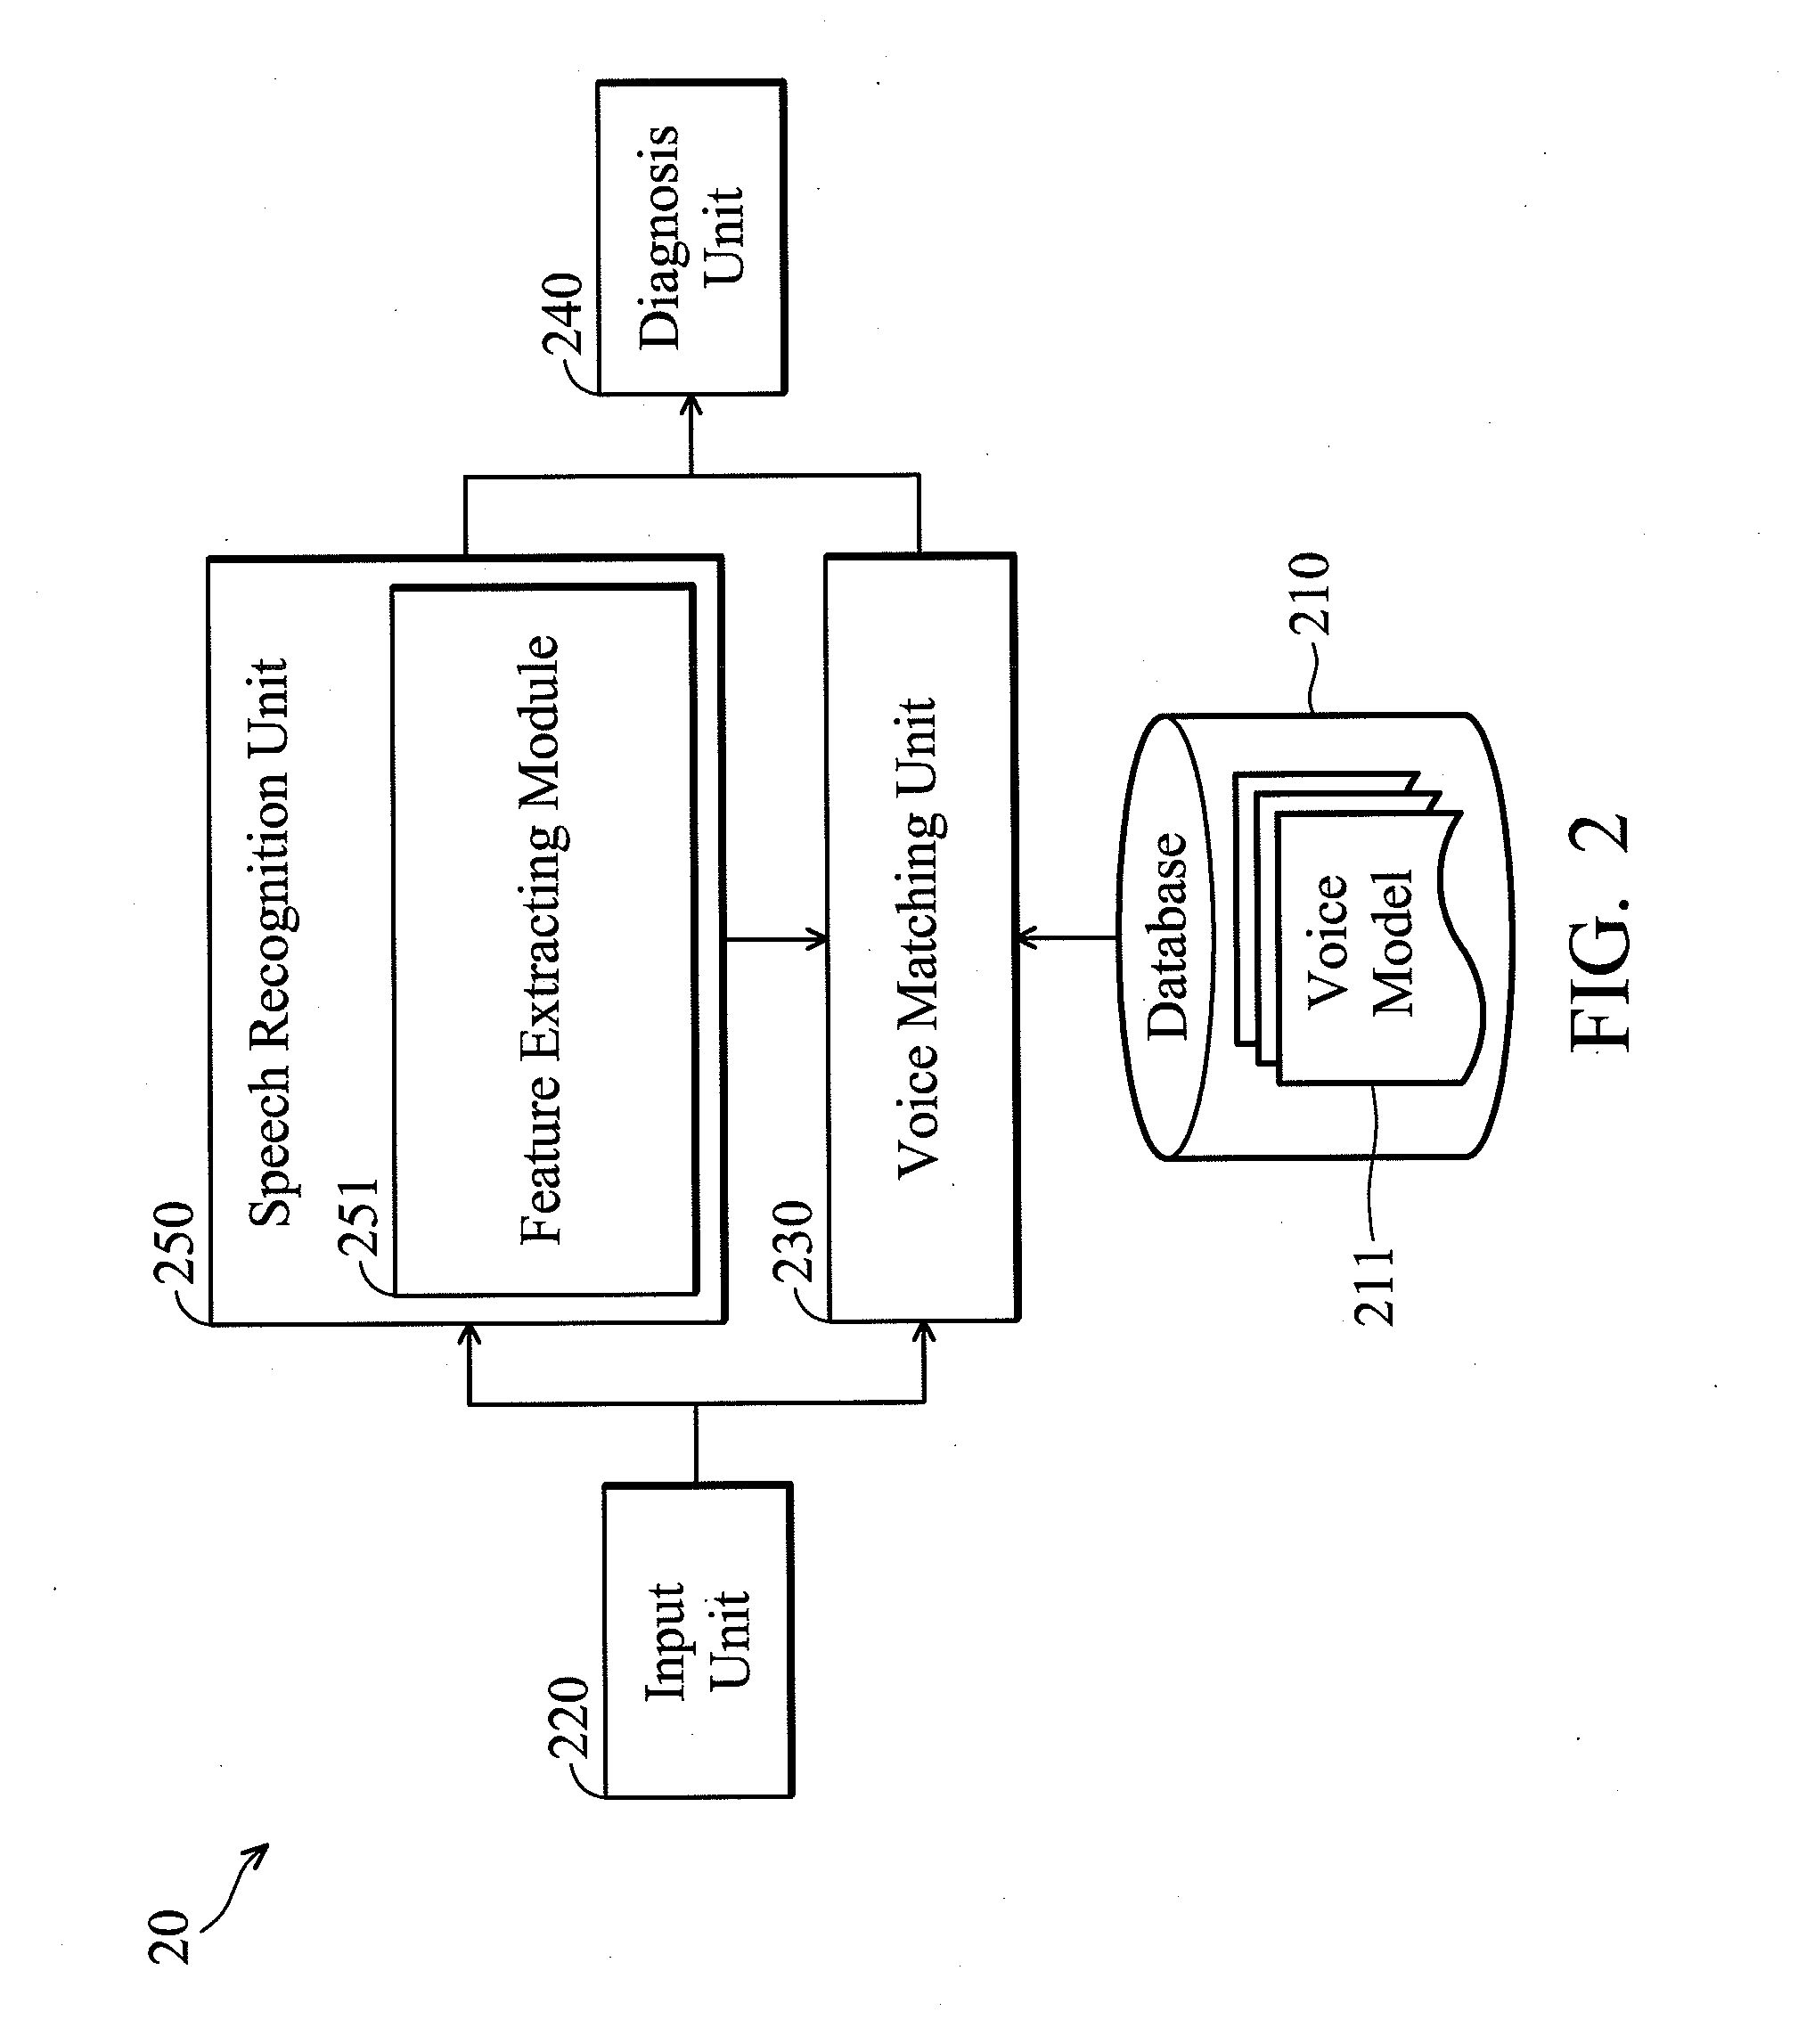 Apparatus for voice assisted medical diagnosis